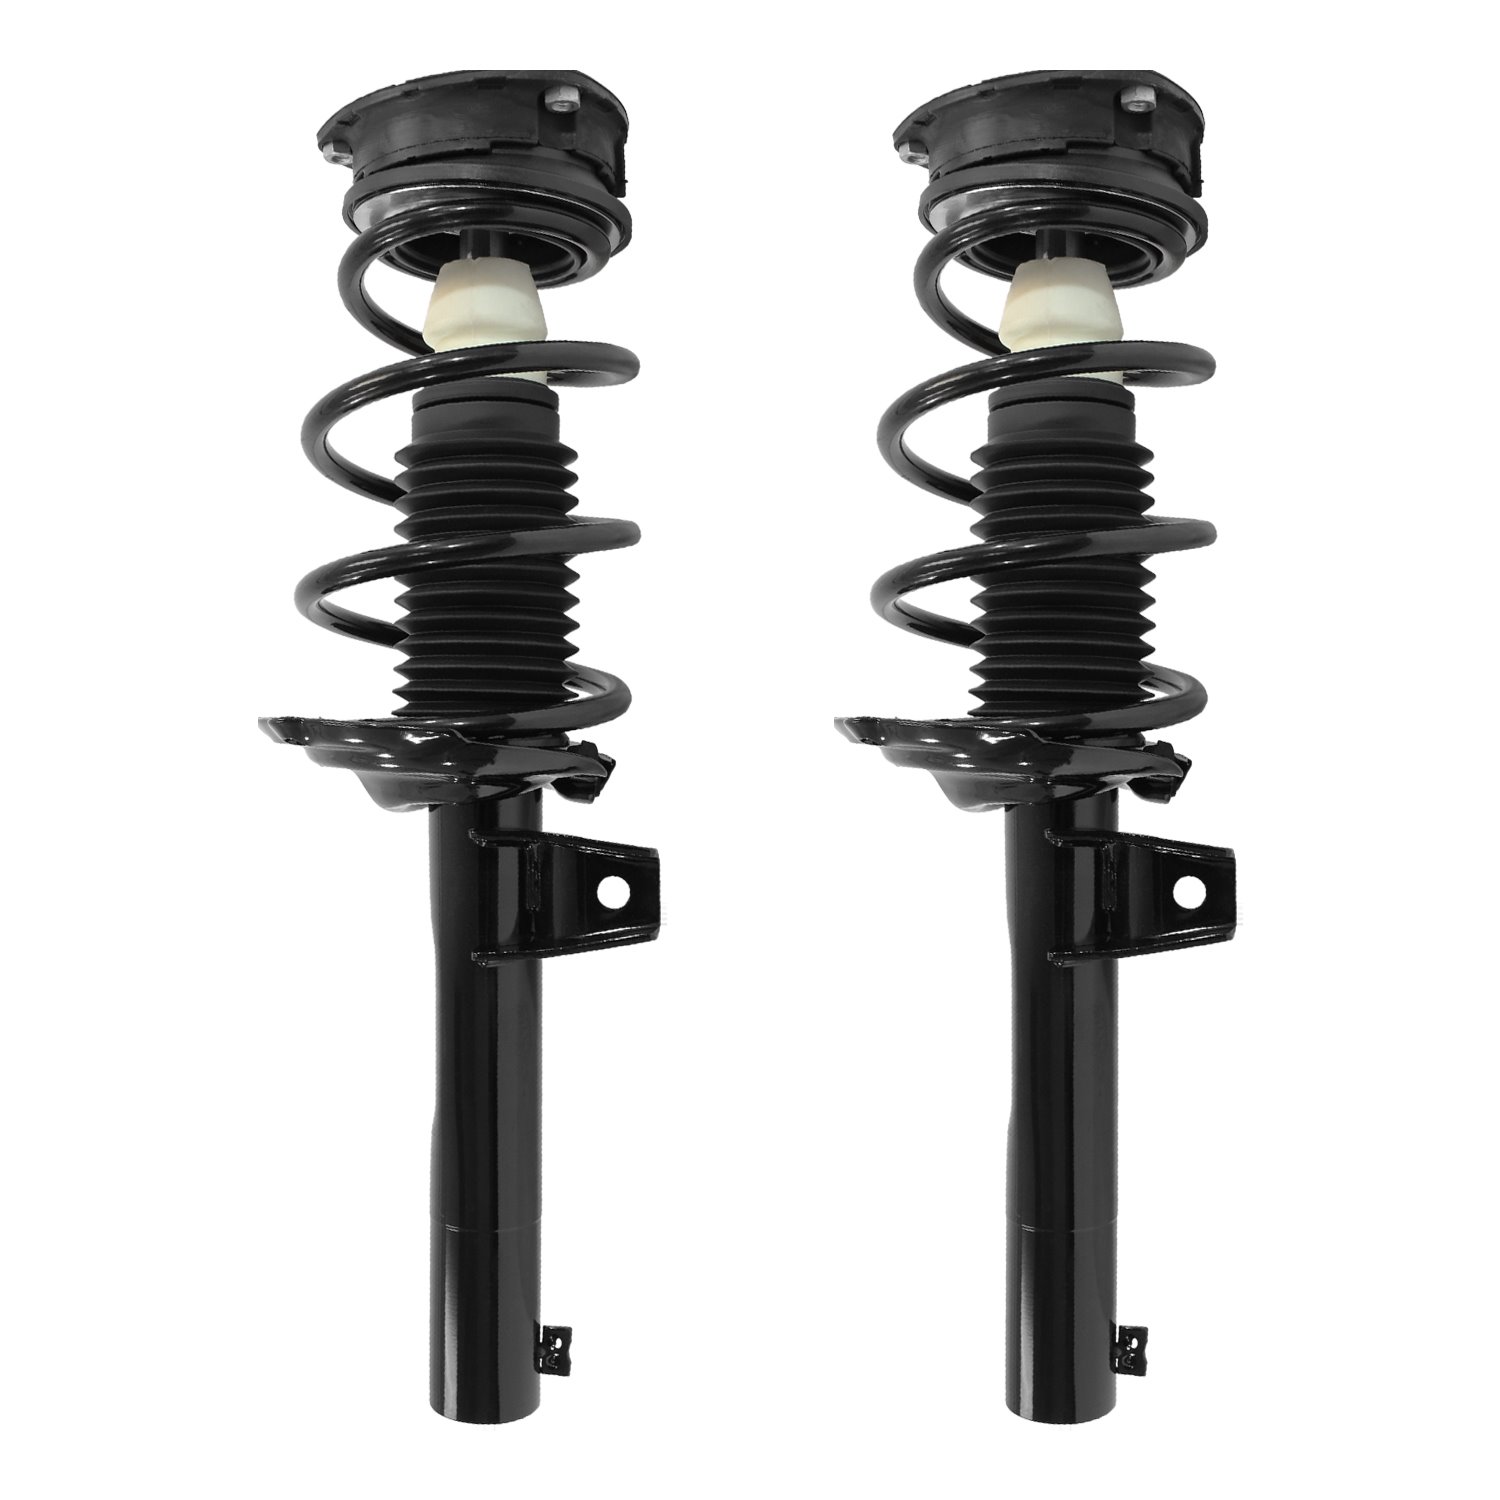 2-13290-001 Front Suspension Strut & Coil Spring Assemby Set Fits Select Audi A3 Quattro, Audi A3, Volkswagen Golf